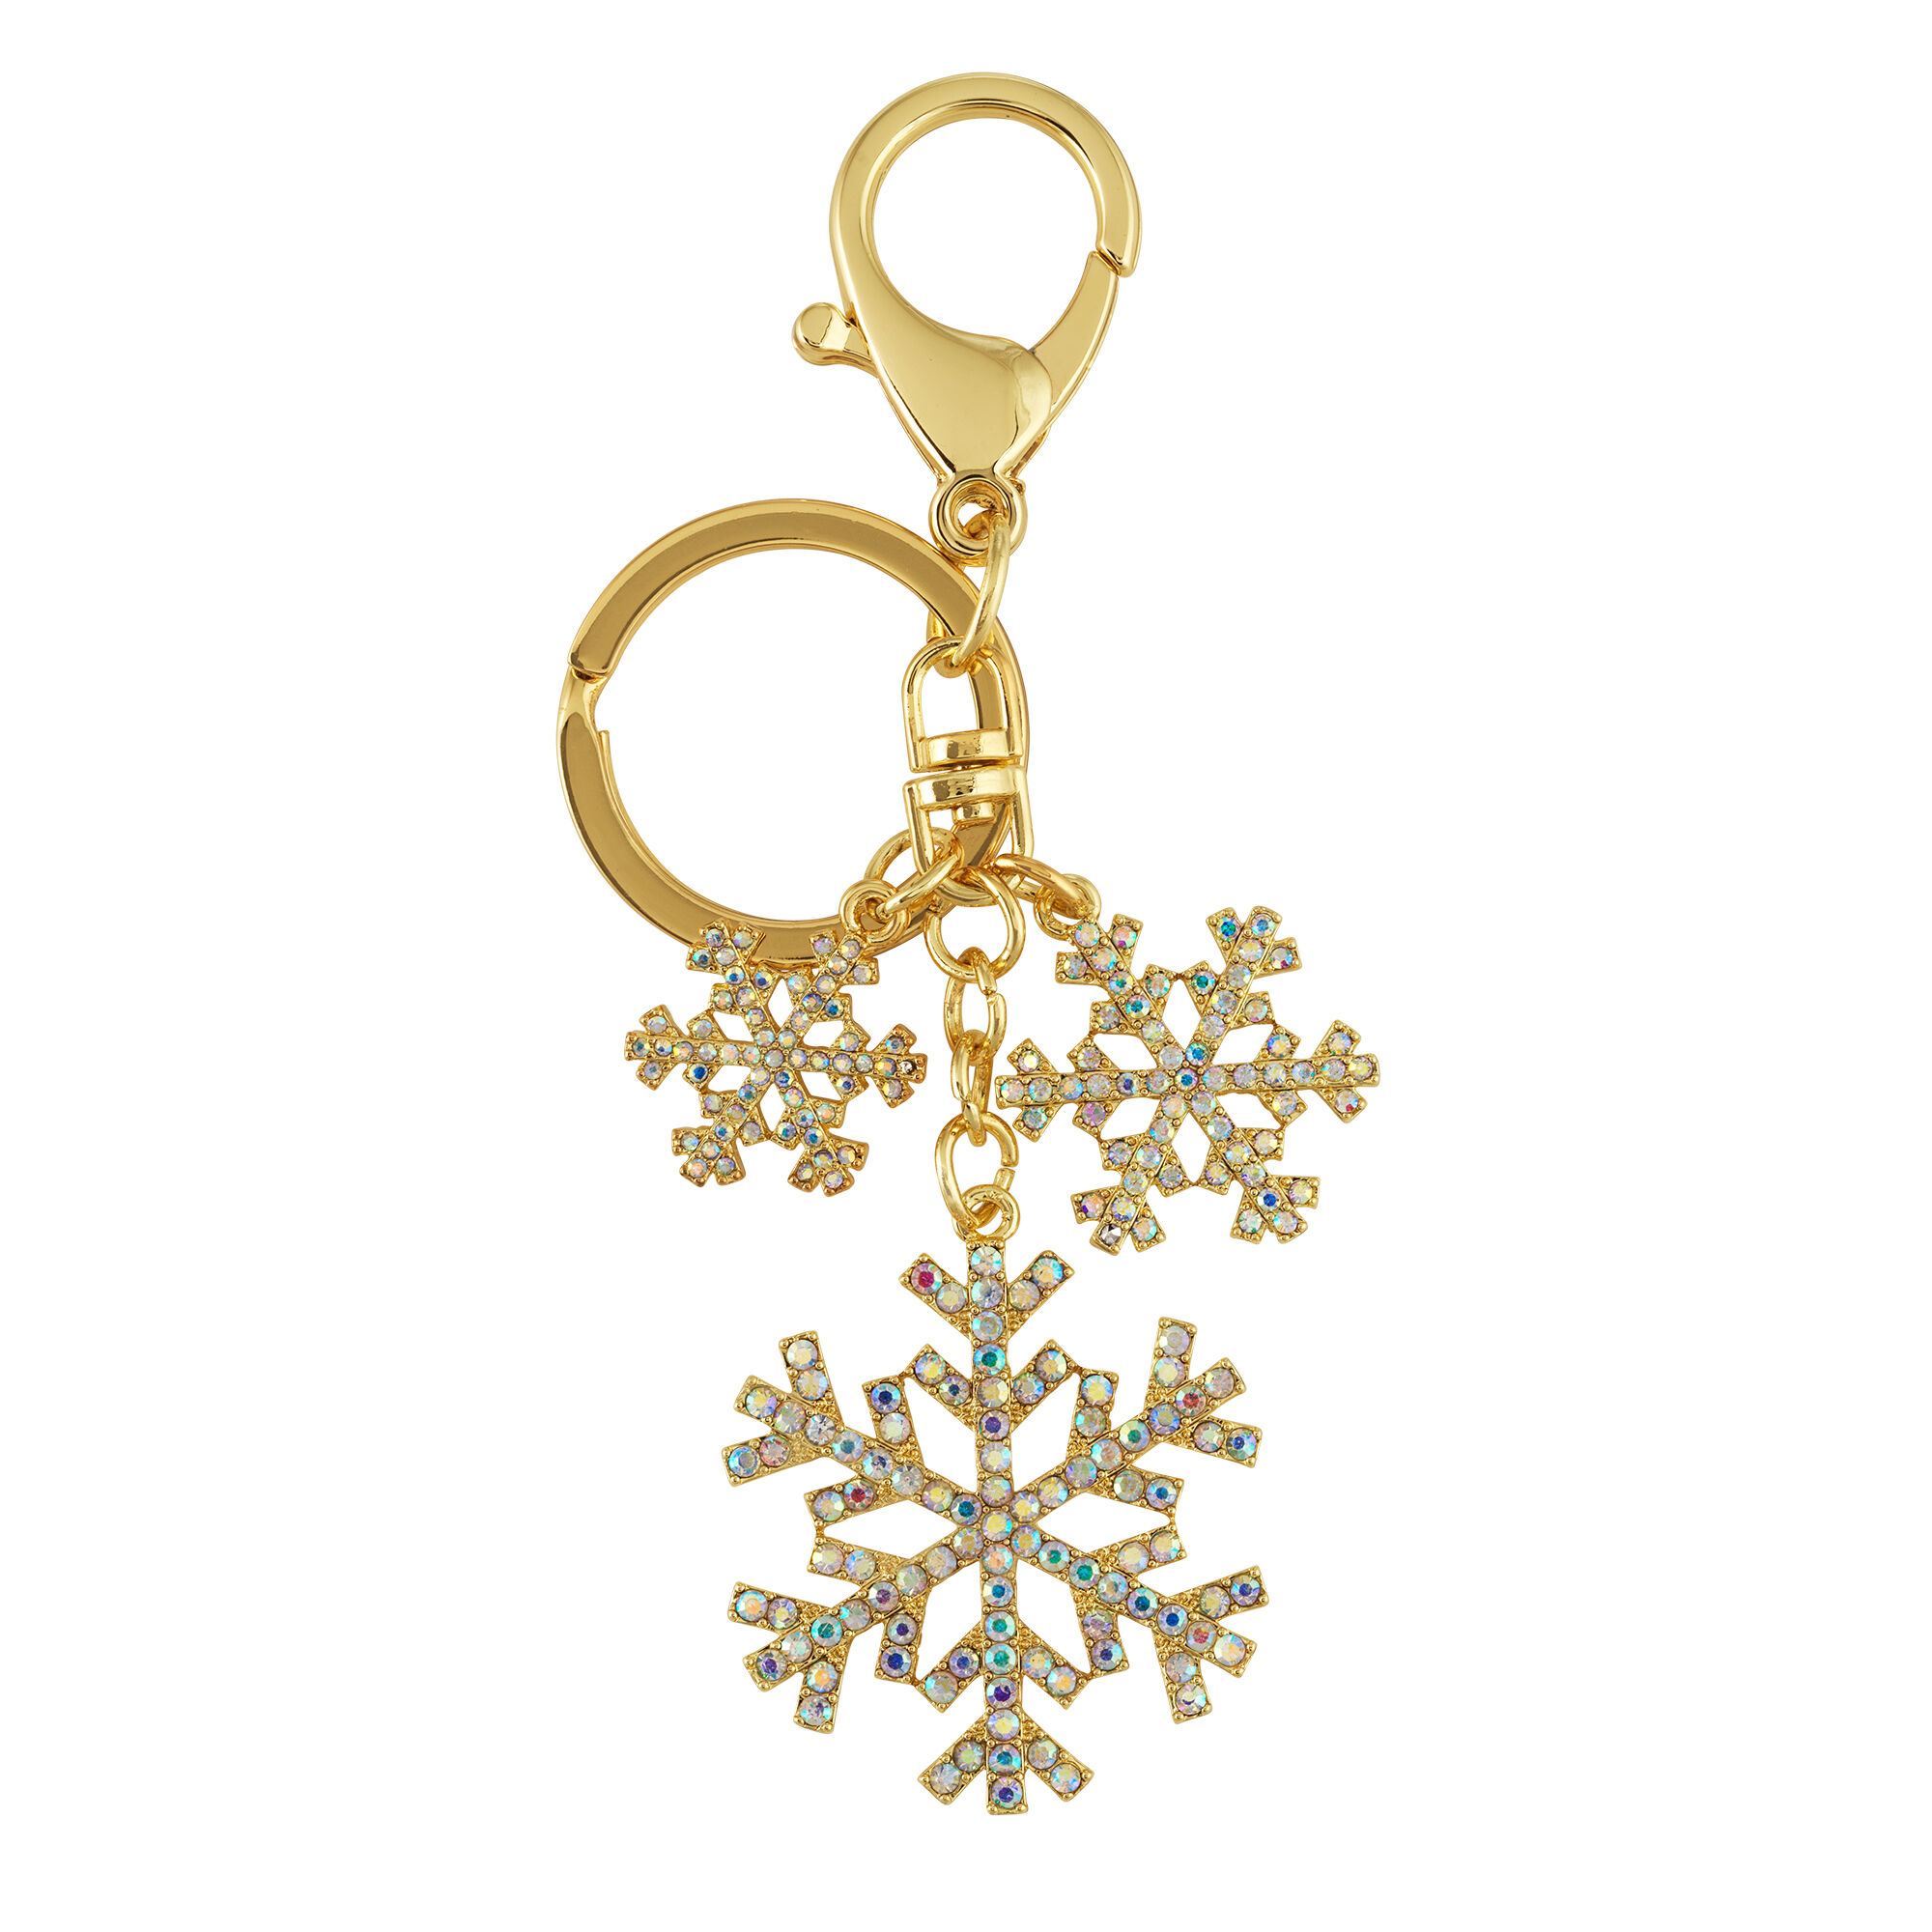 A Year of Cheer Keychains 10695 0017 a main